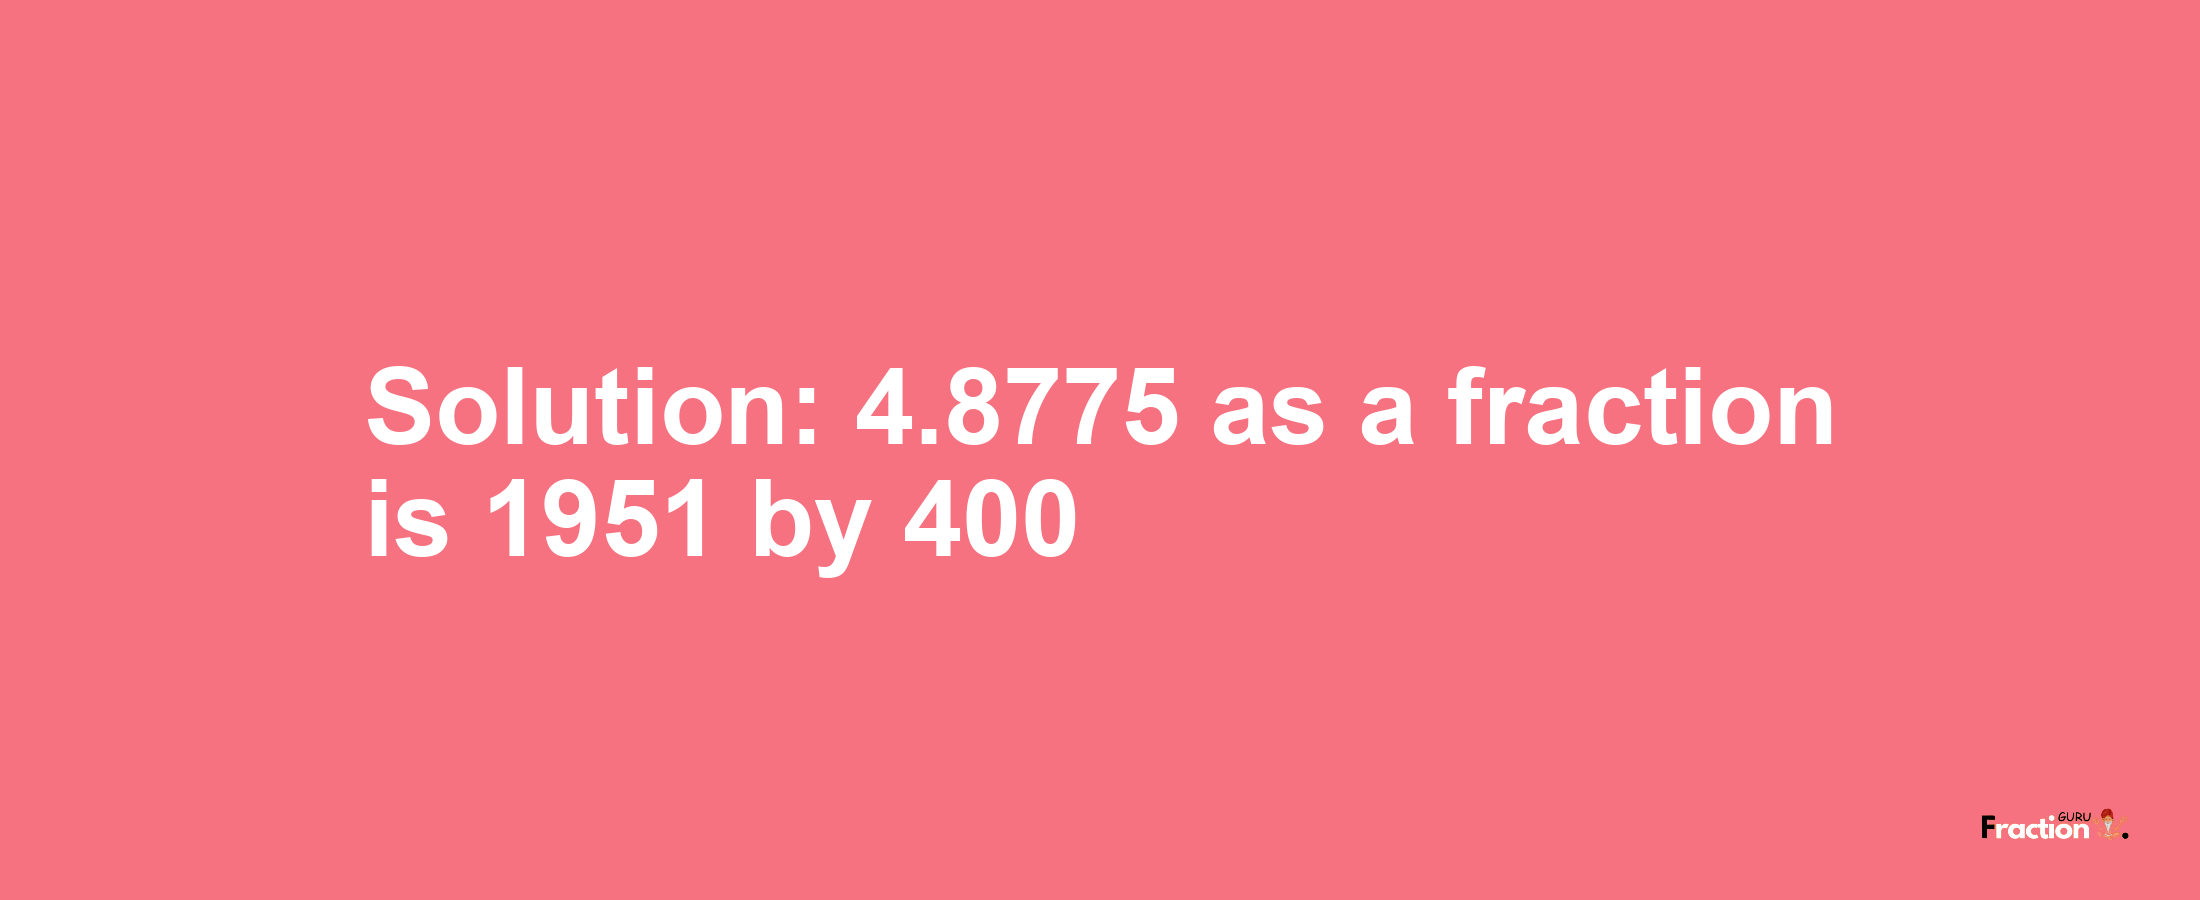 Solution:4.8775 as a fraction is 1951/400